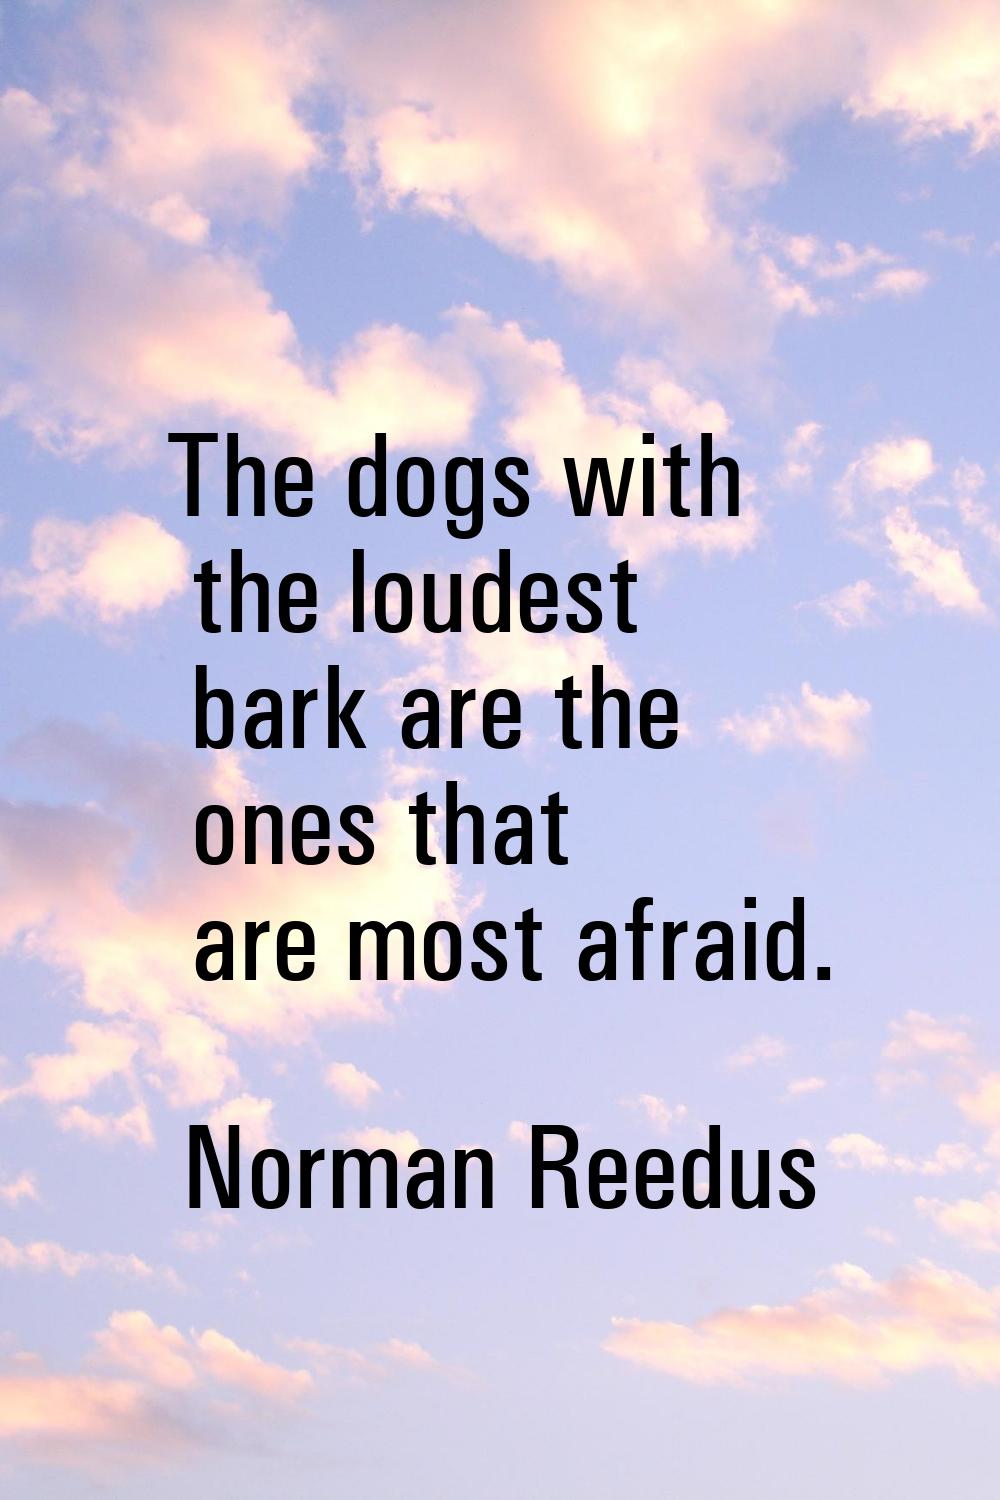 The dogs with the loudest bark are the ones that are most afraid.